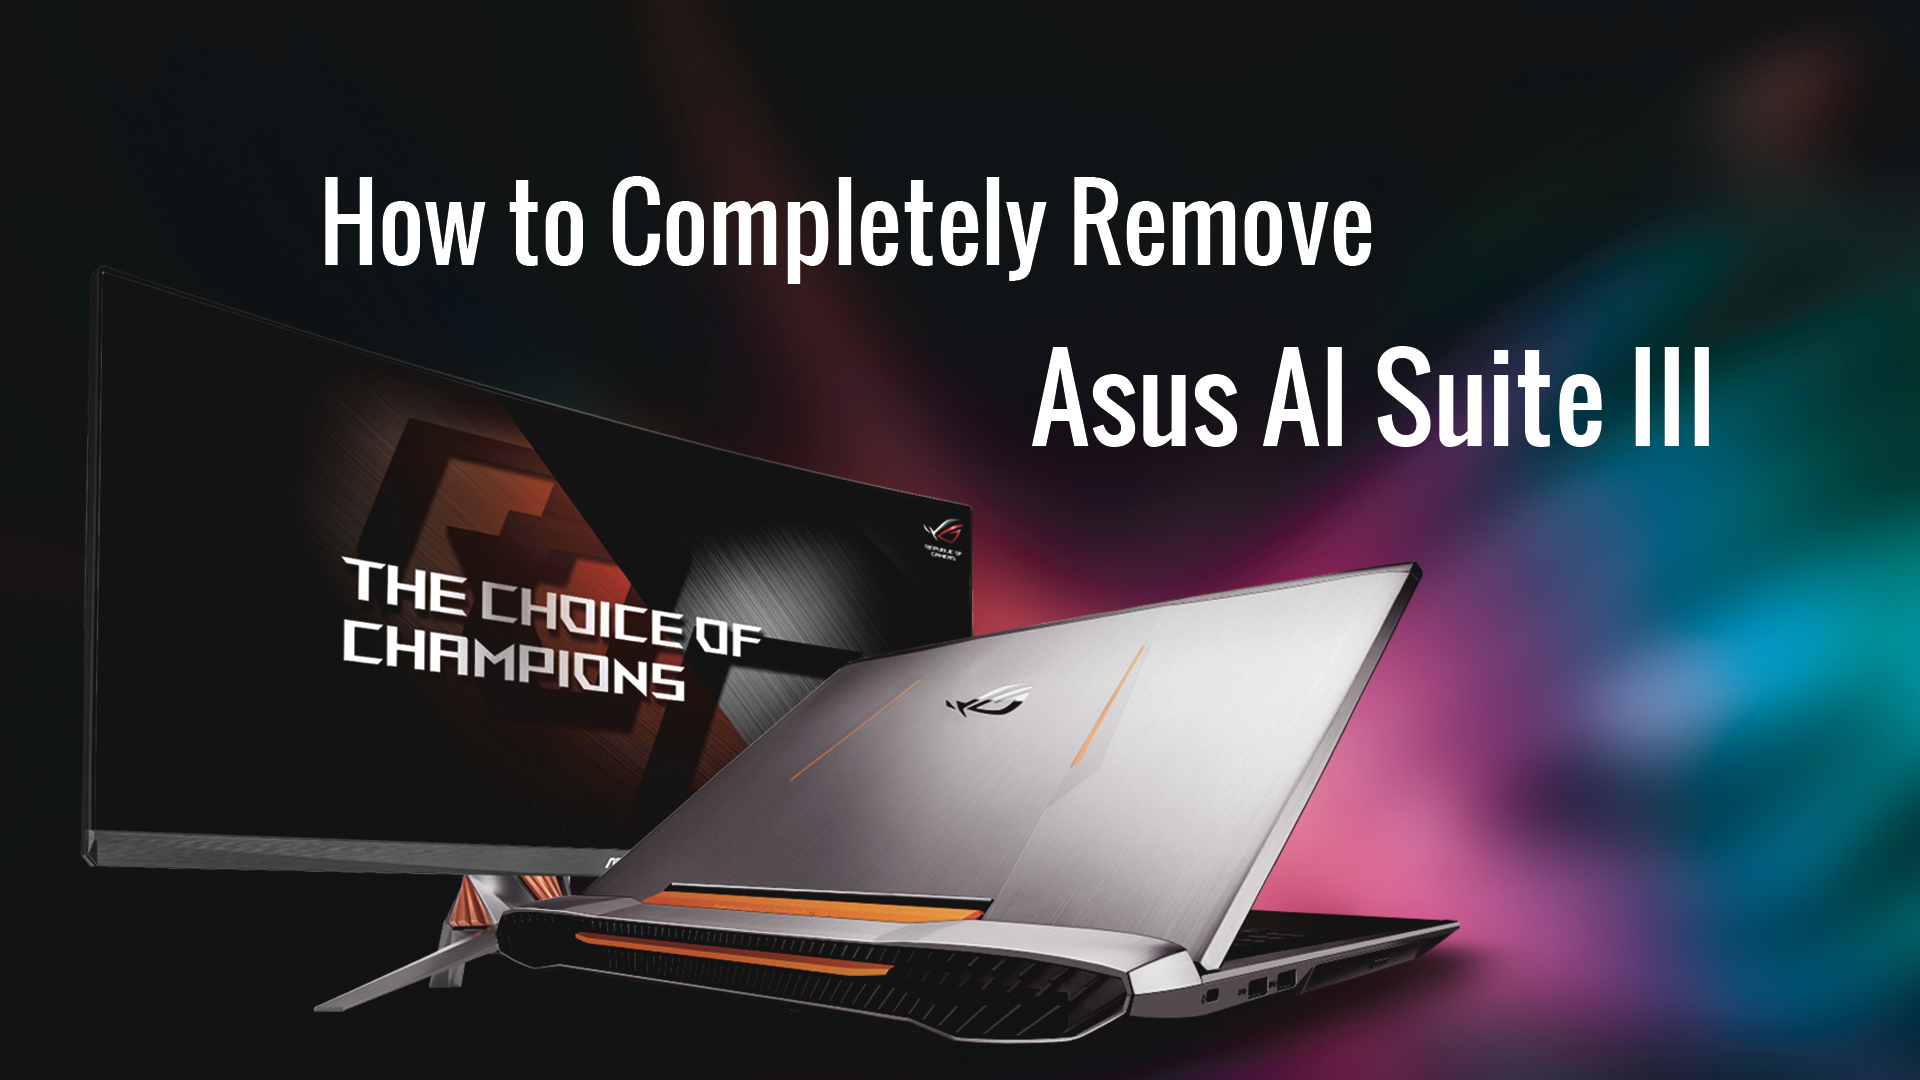 Asus Ai Suite Iii Cleaner Download